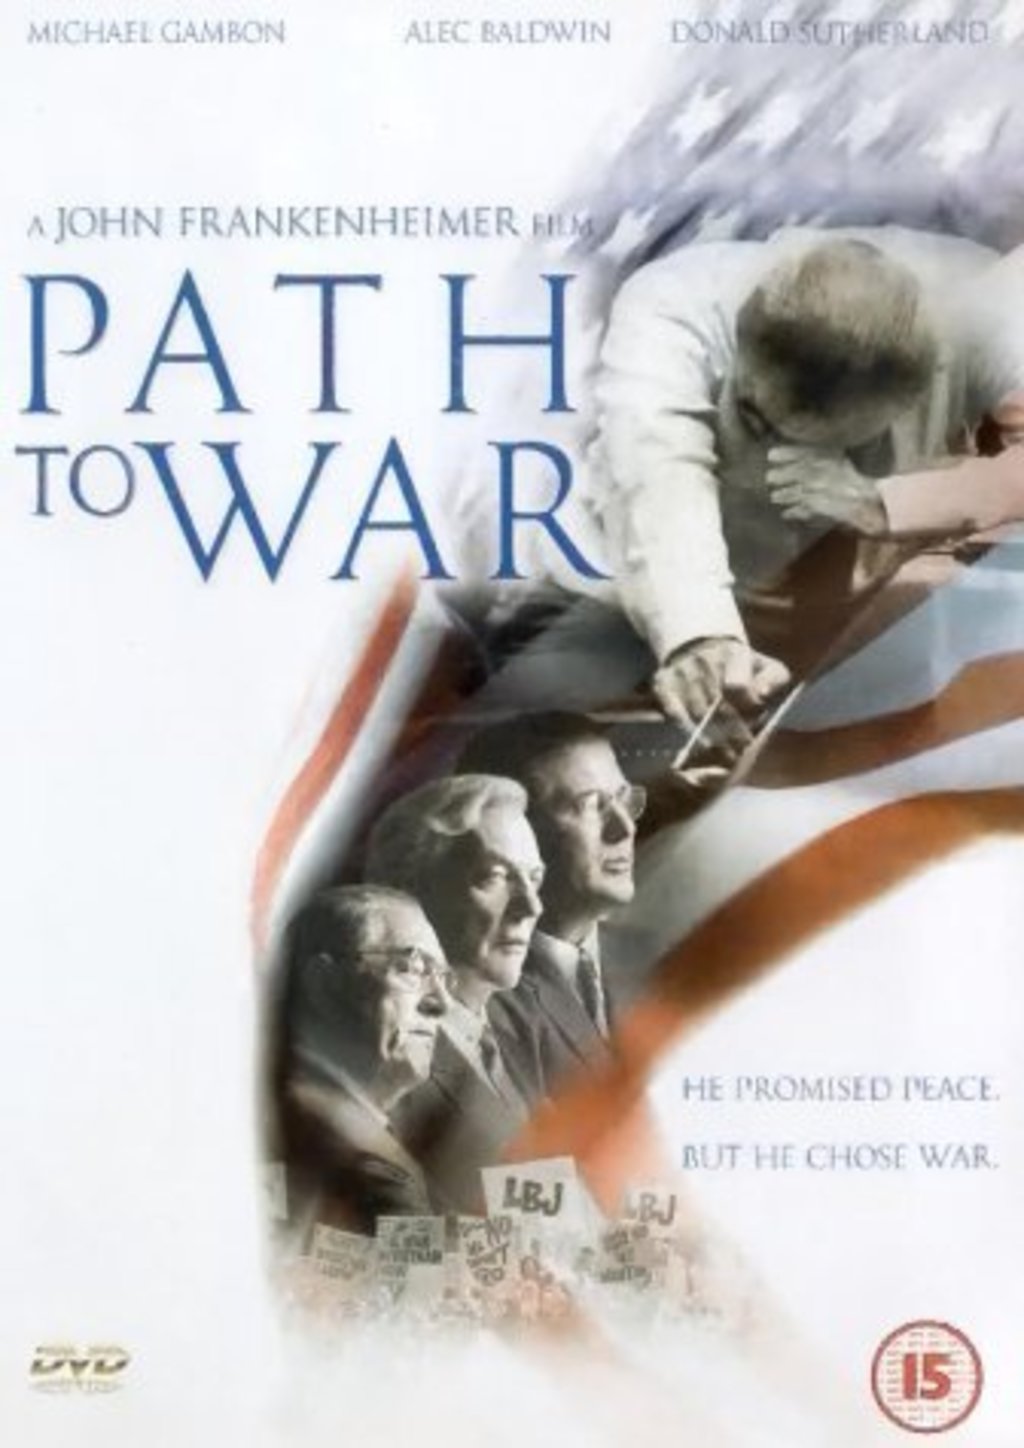 path to war movie review